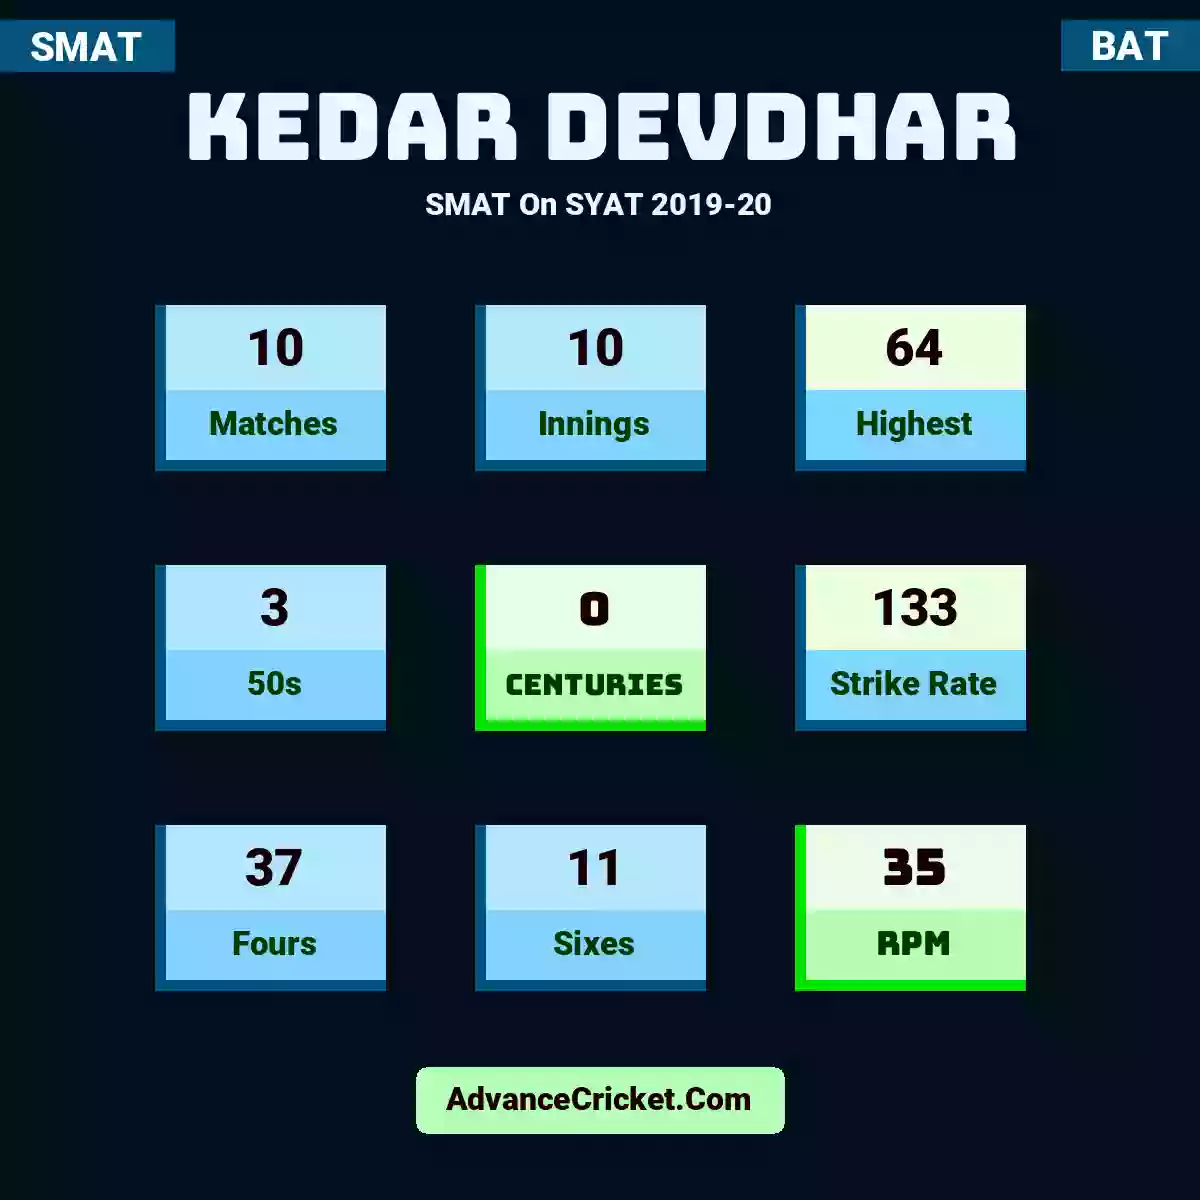 Kedar Devdhar SMAT  On SYAT 2019-20, Kedar Devdhar played 10 matches, scored 64 runs as highest, 3 half-centuries, and 0 centuries, with a strike rate of 133. K.Devdhar hit 37 fours and 11 sixes, with an RPM of 35.